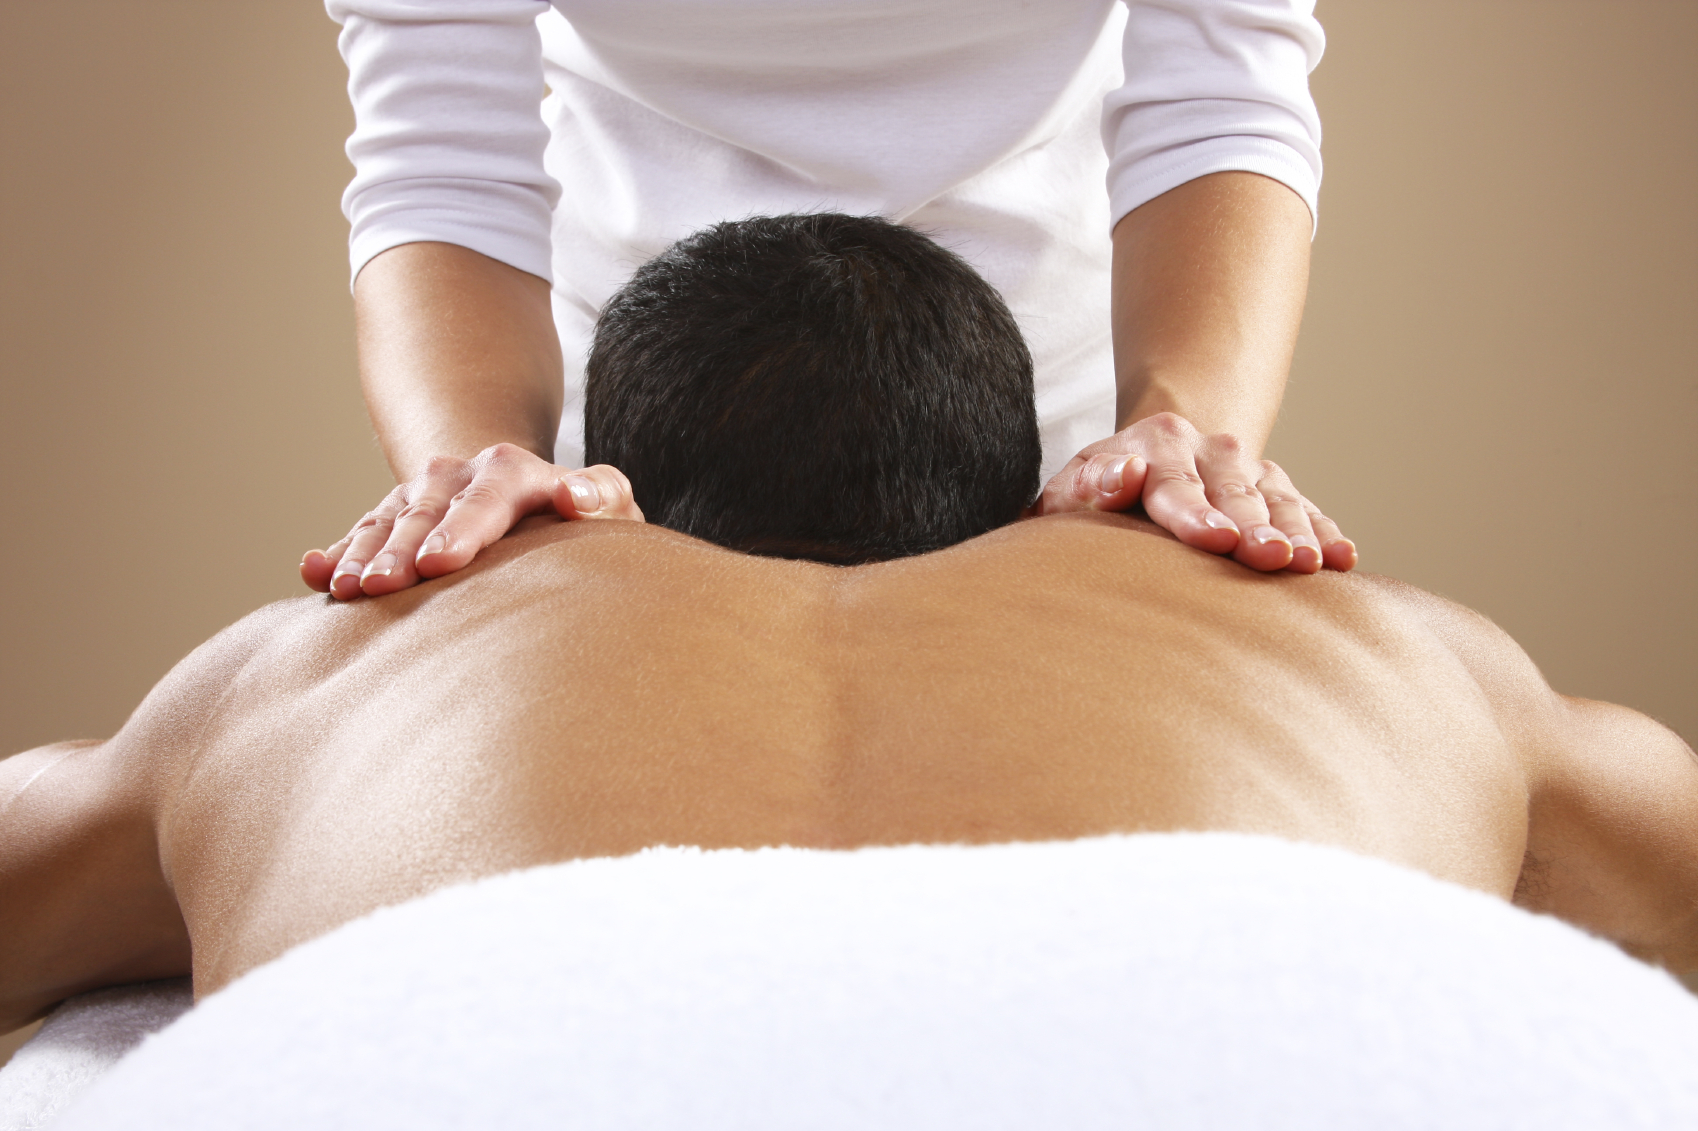 Do's and Don'ts of Getting a Massage